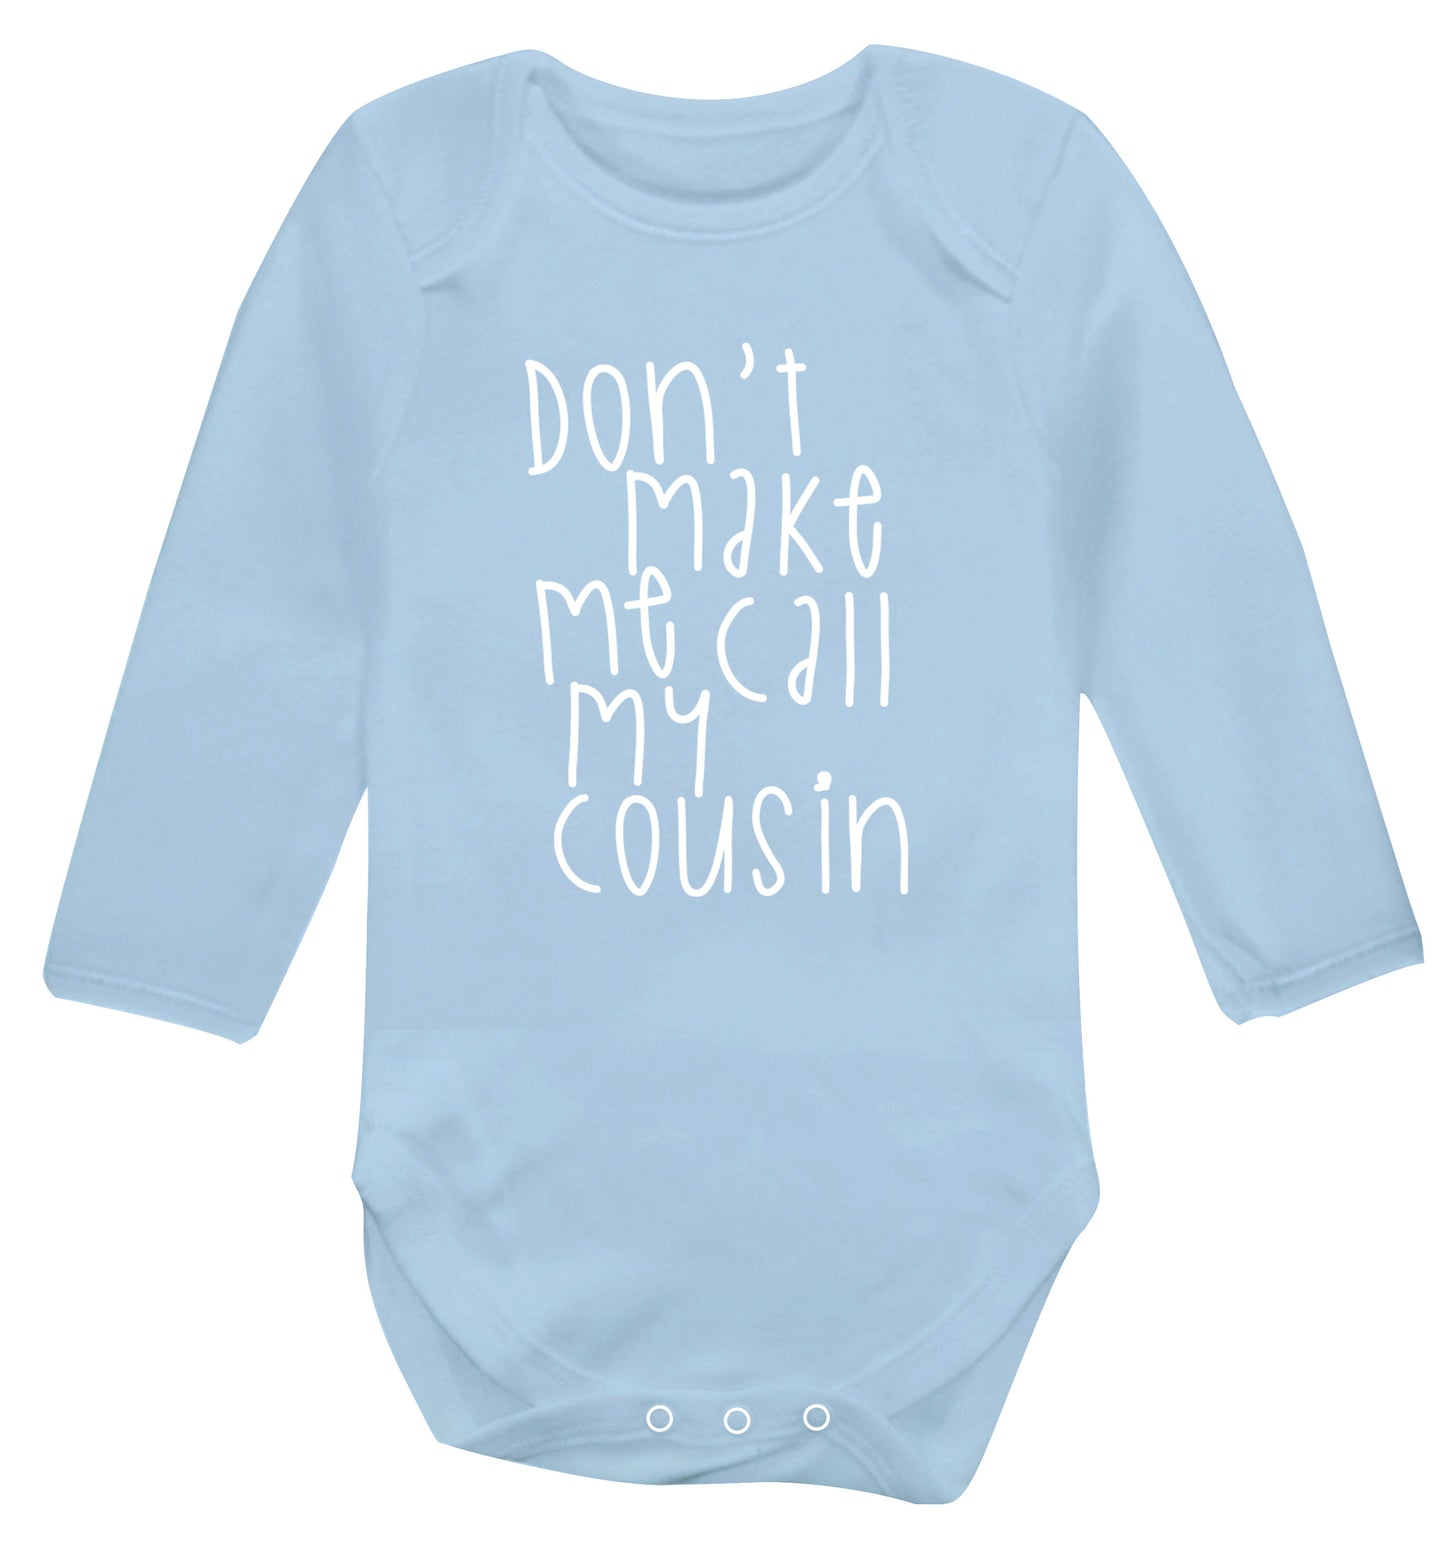 Don't make me call my cousin Baby Vest long sleeved pale blue 6-12 months